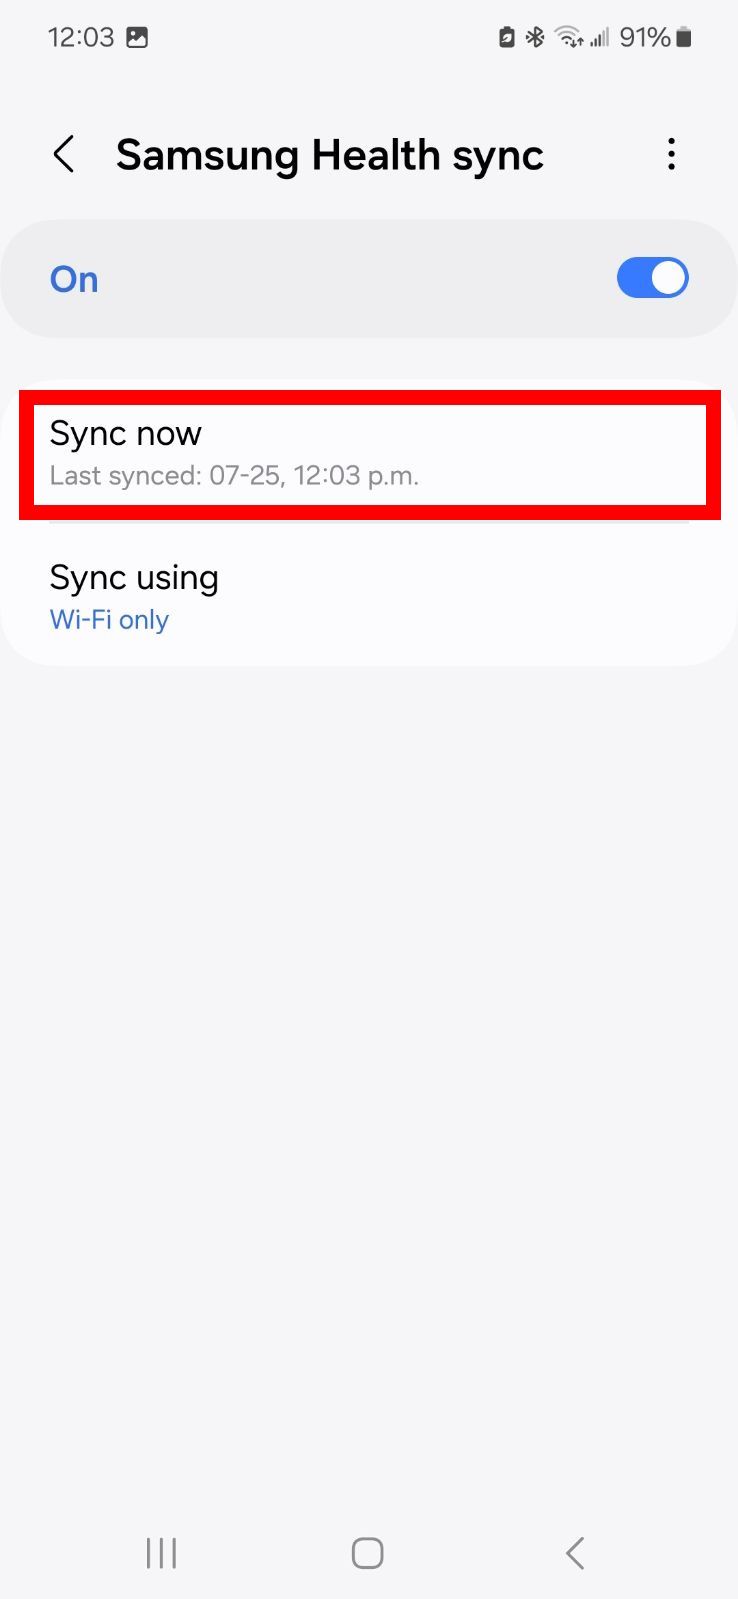 Red rectangle outline highlighting Sync now in Samsung Health app on Samsung phone